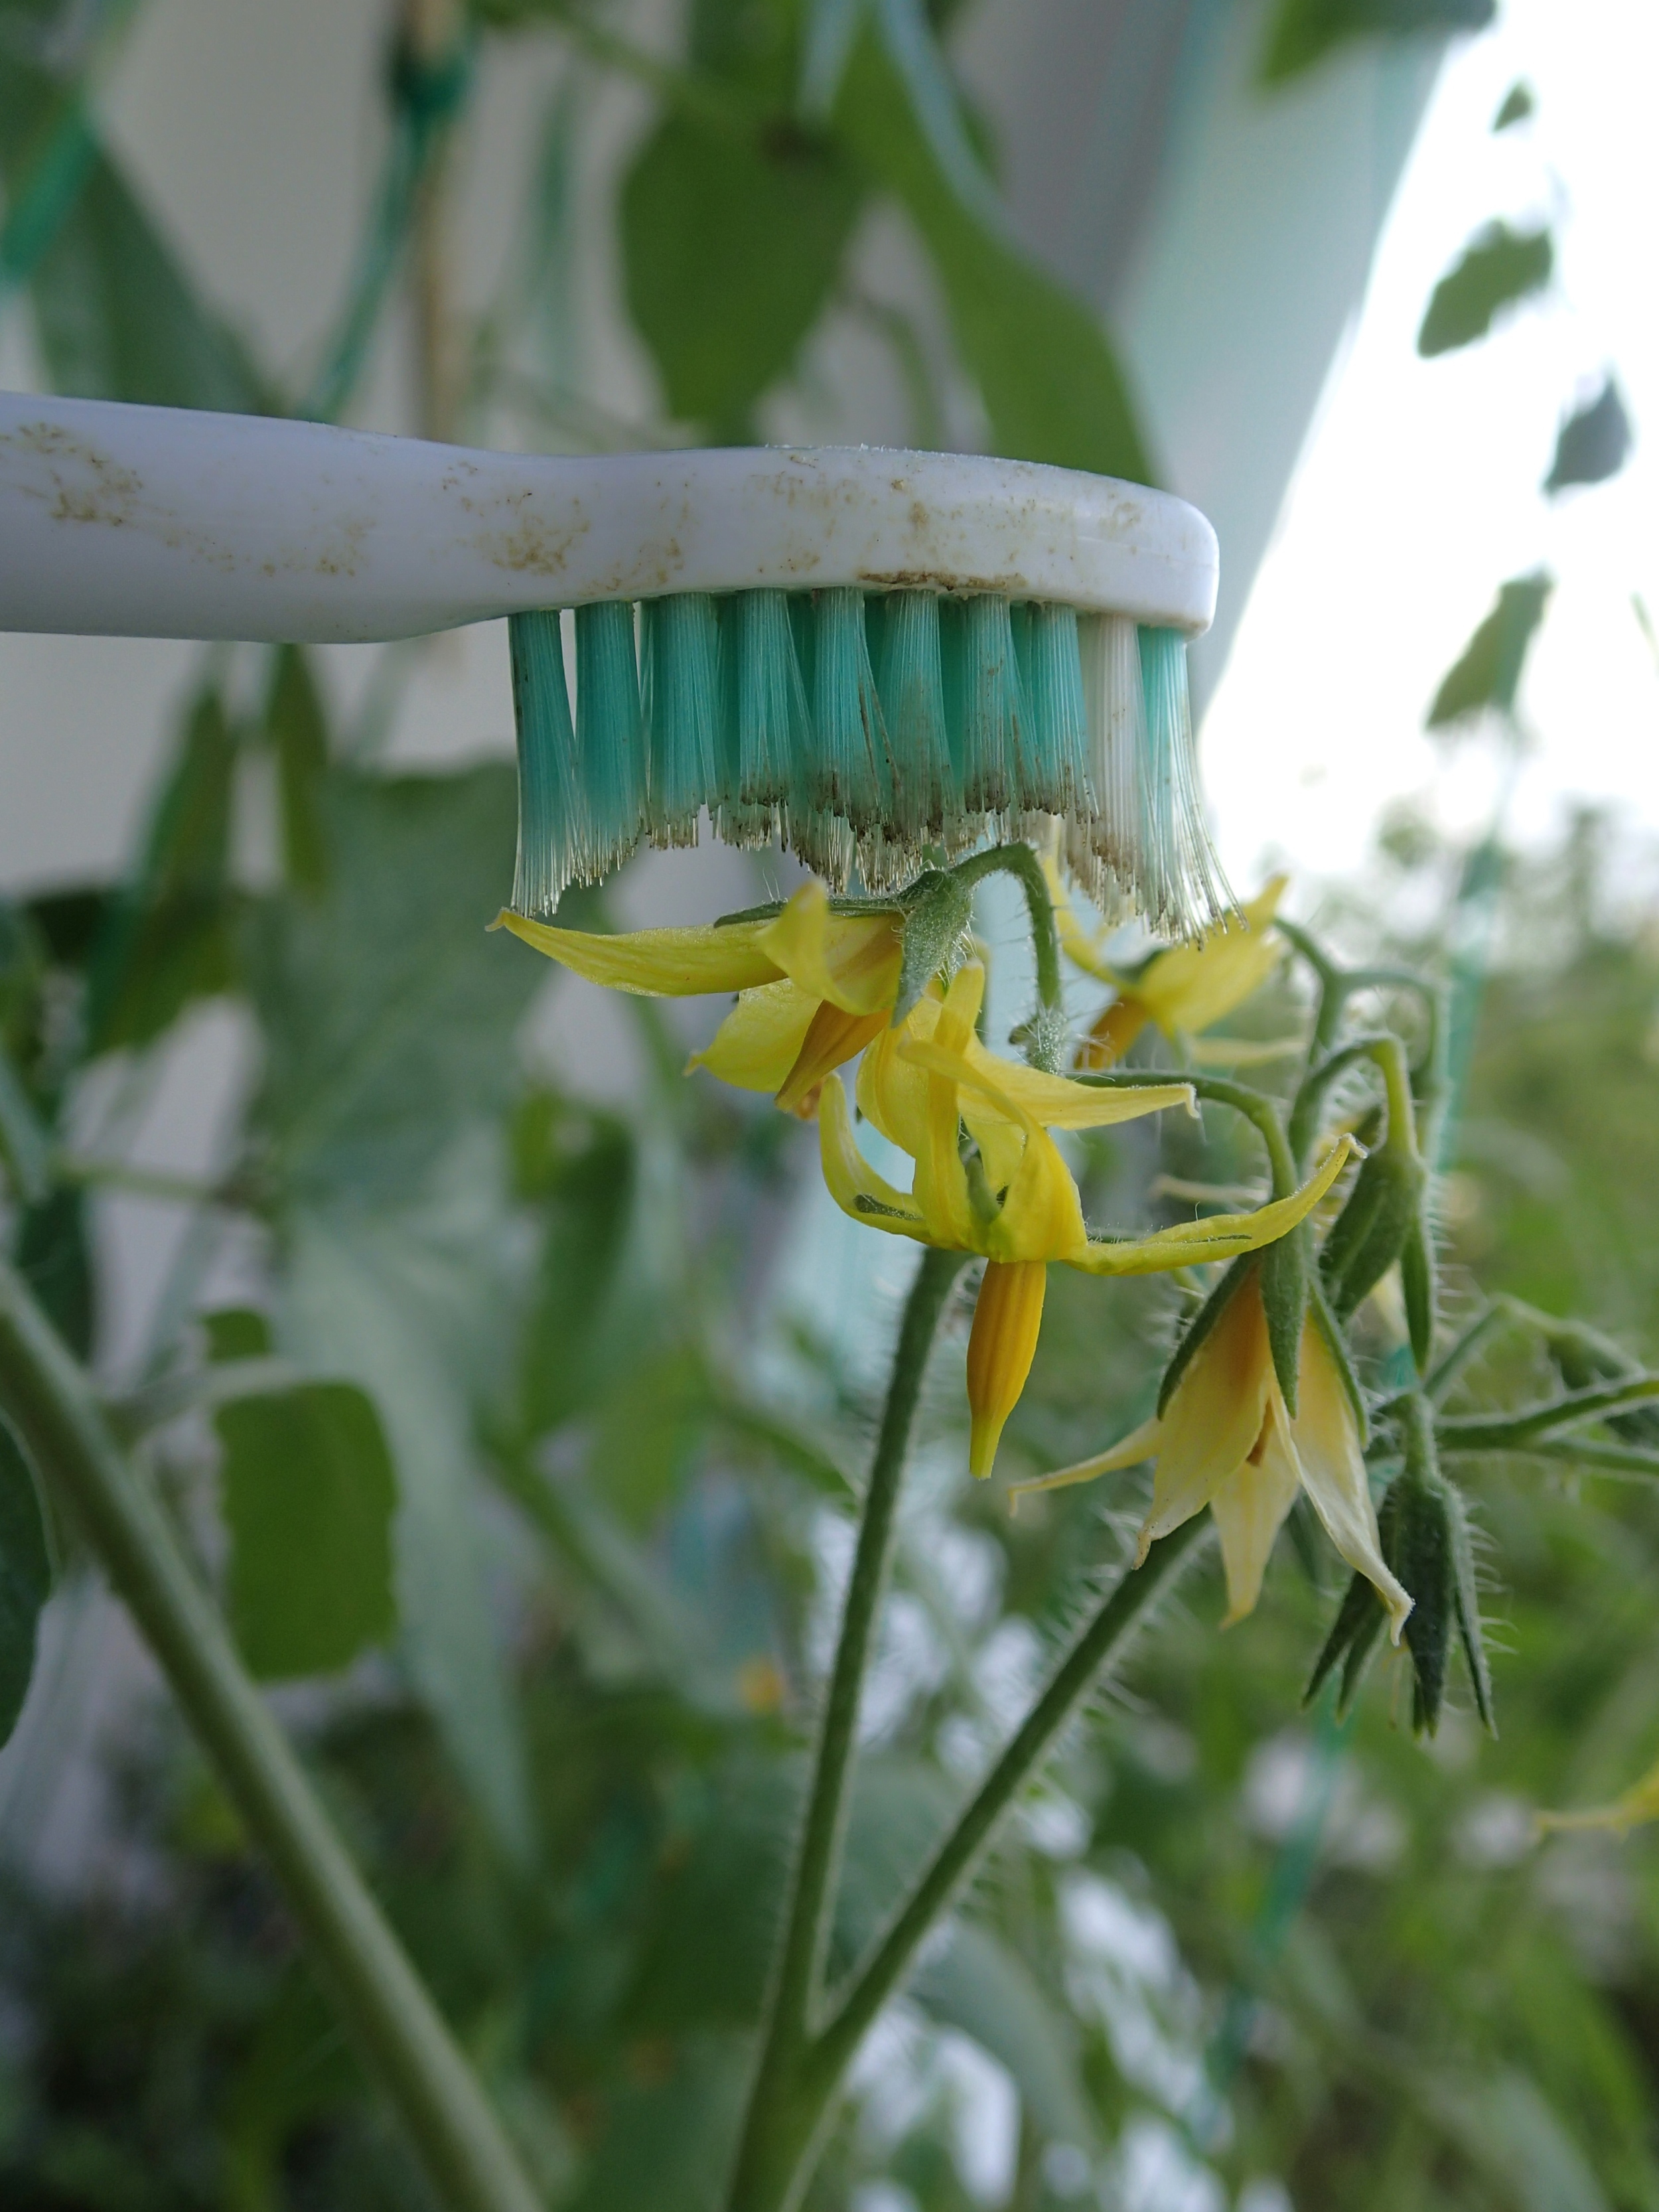 Artificial pollination, electric toothbrush style